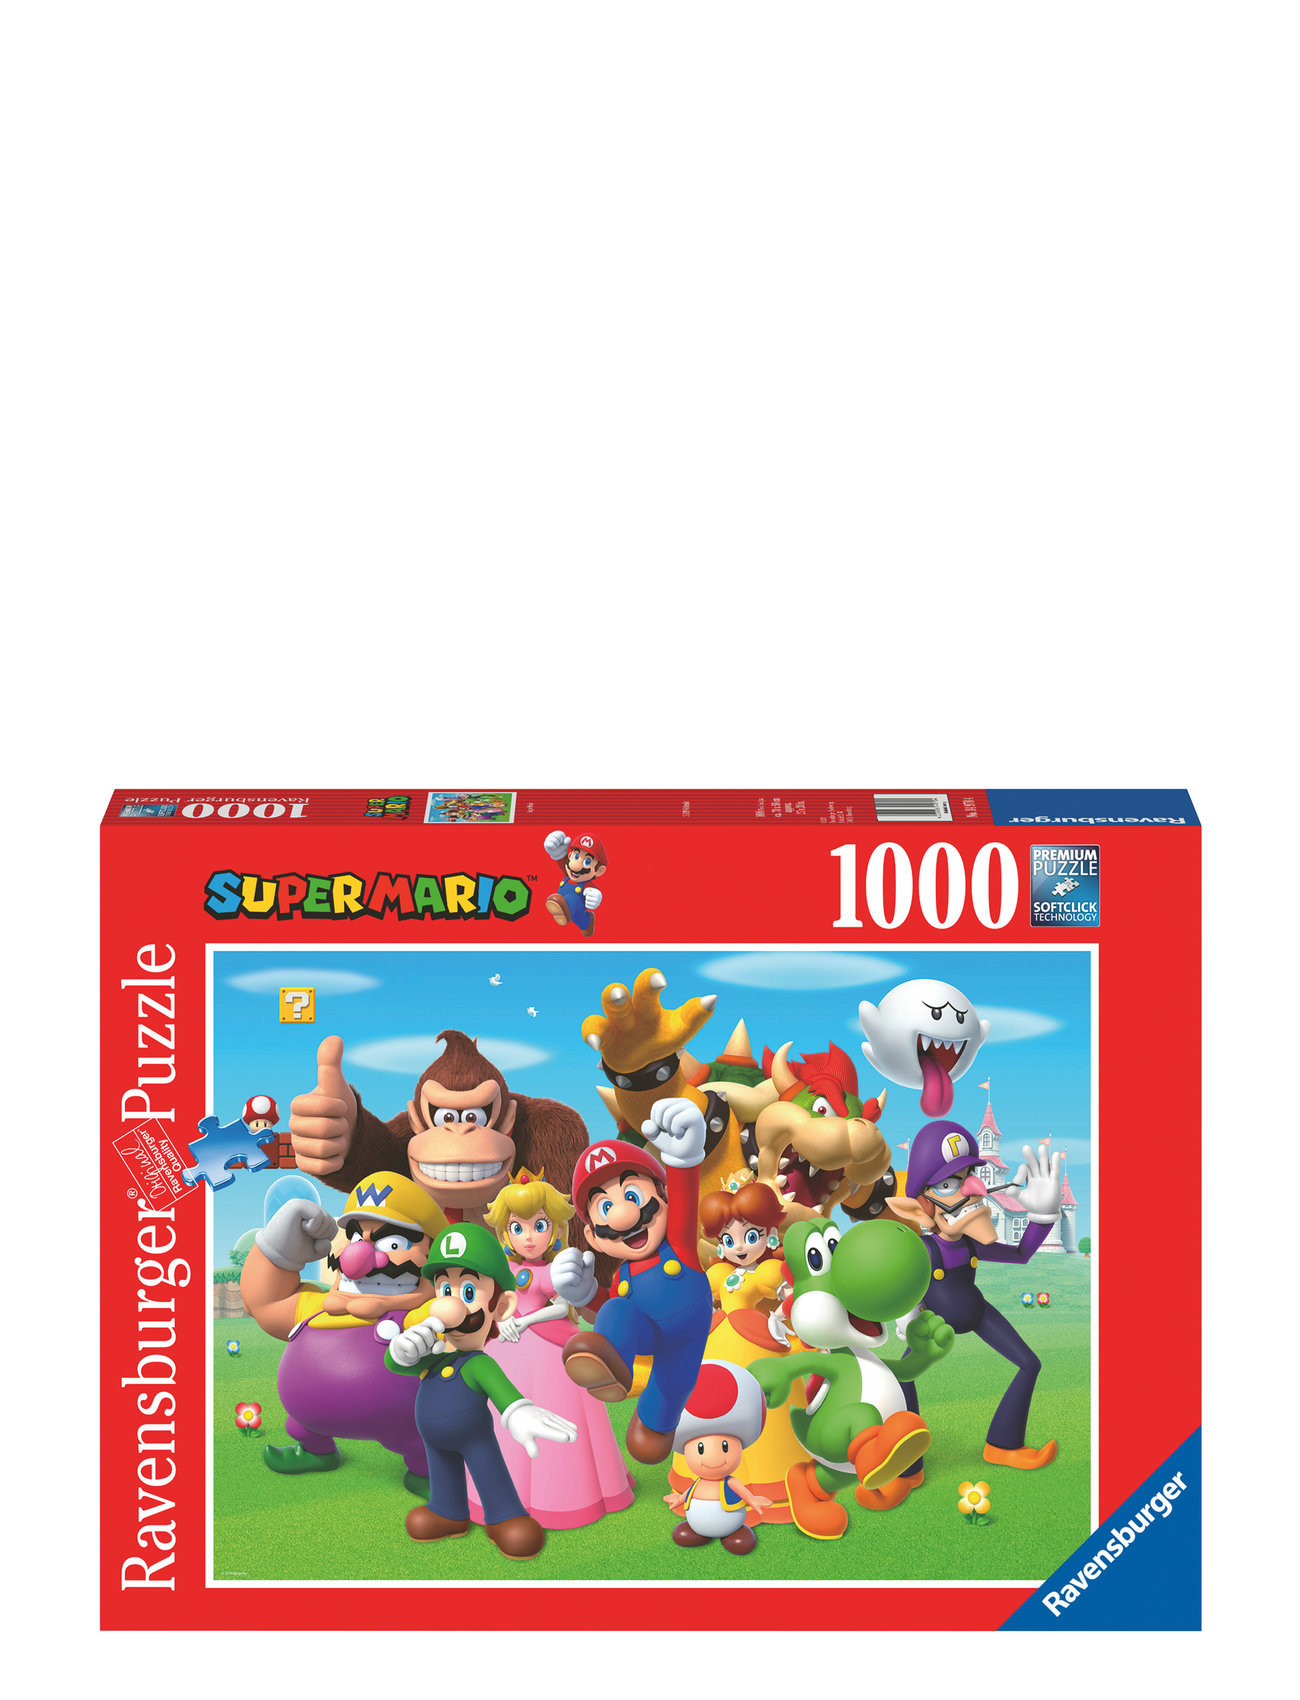 Super Mario 1000P Toys Puzzles And Games Puzzles Classic Puzzles Multi/patterned Ravensburger